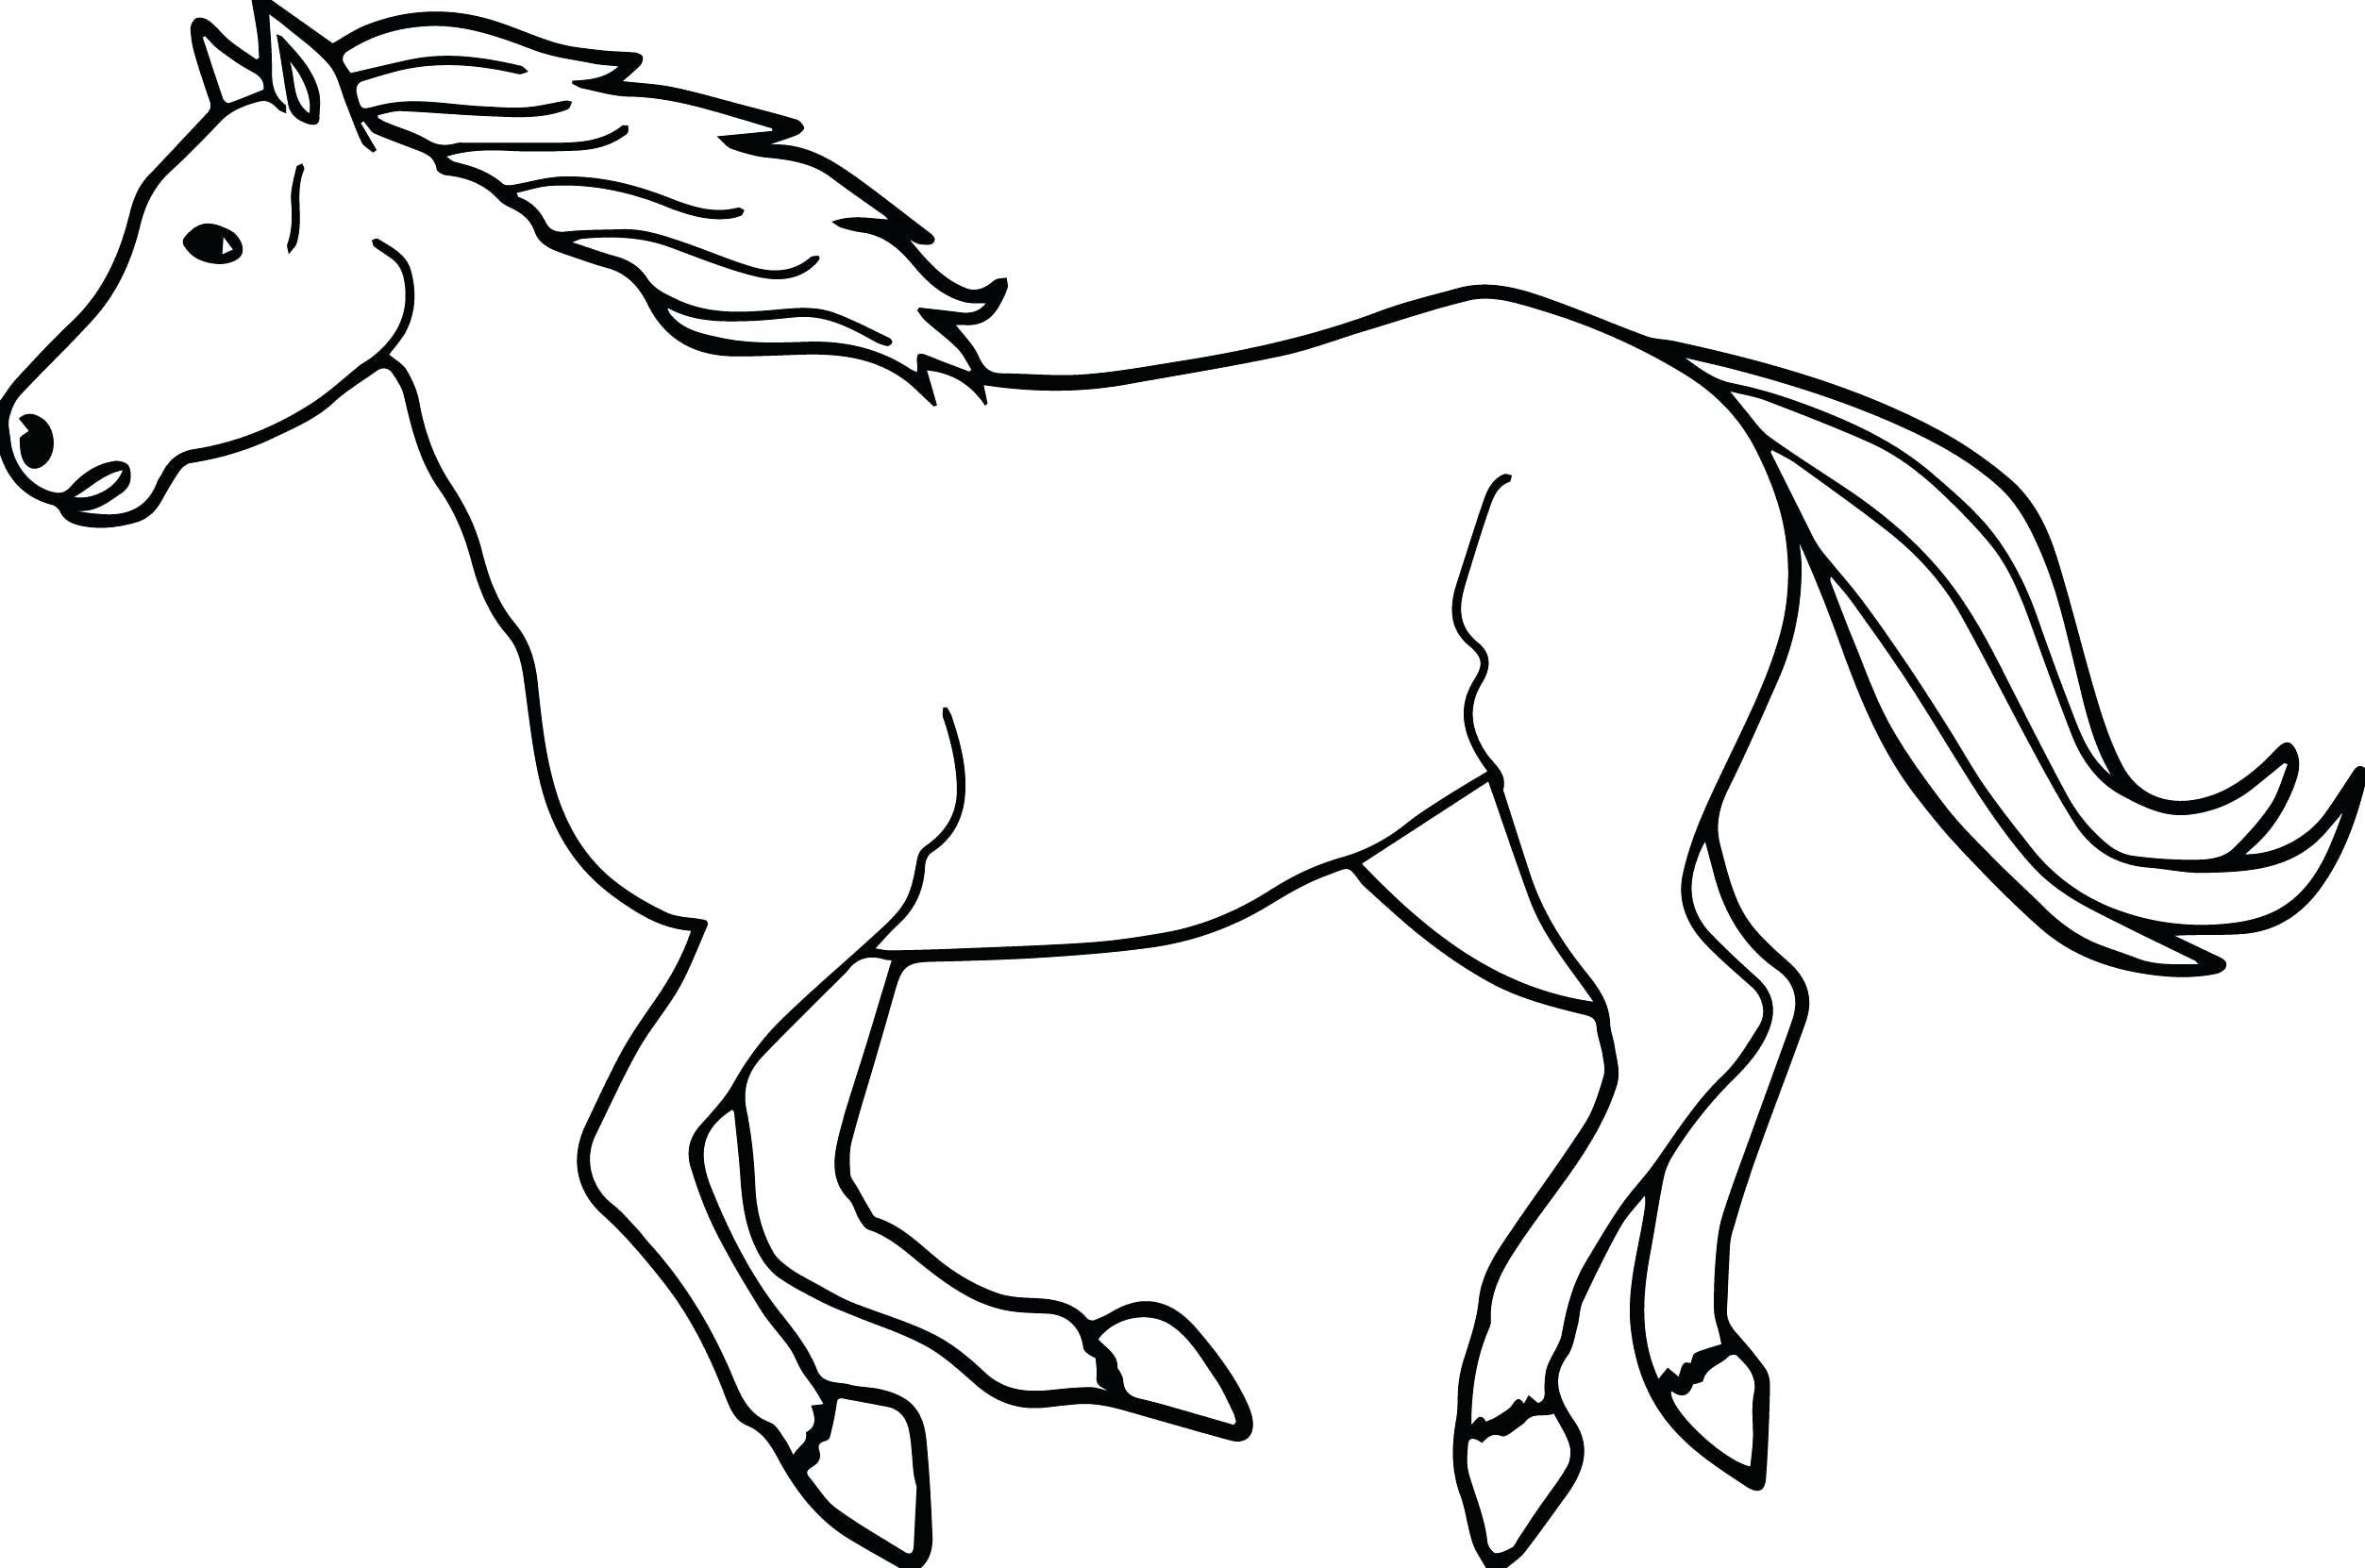 Coloring Book : Horse Coloring Pages Preschool And Foal ...